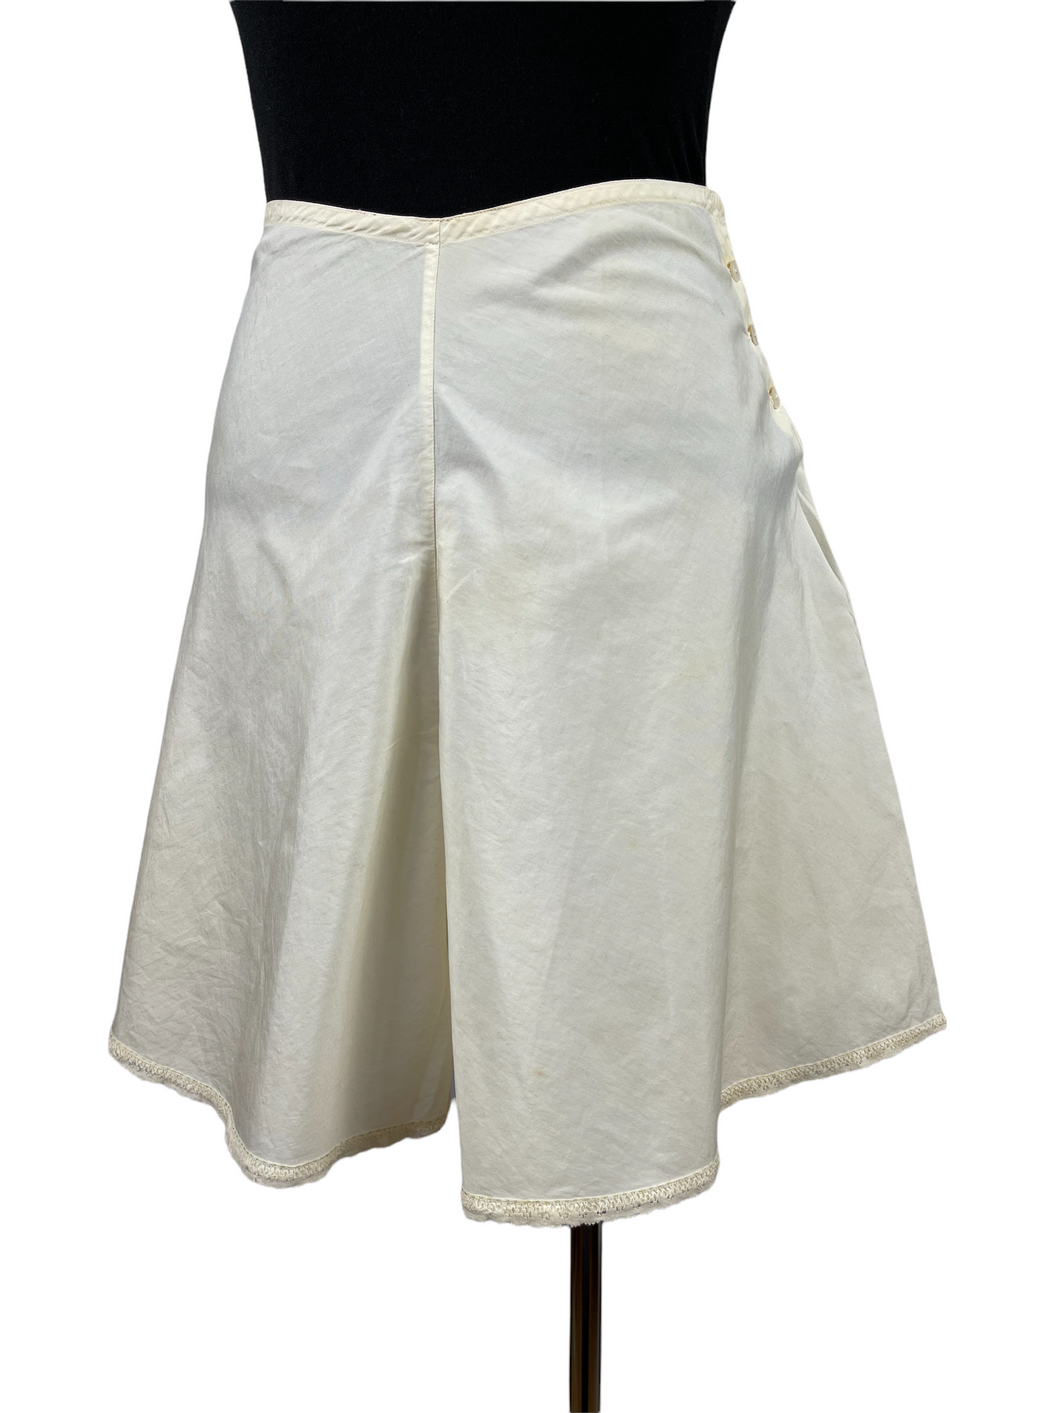 Original 1930's 1940's Cream Silk French Knickers with Lace Trim - Vintage Tap Pants - Waist 25 26